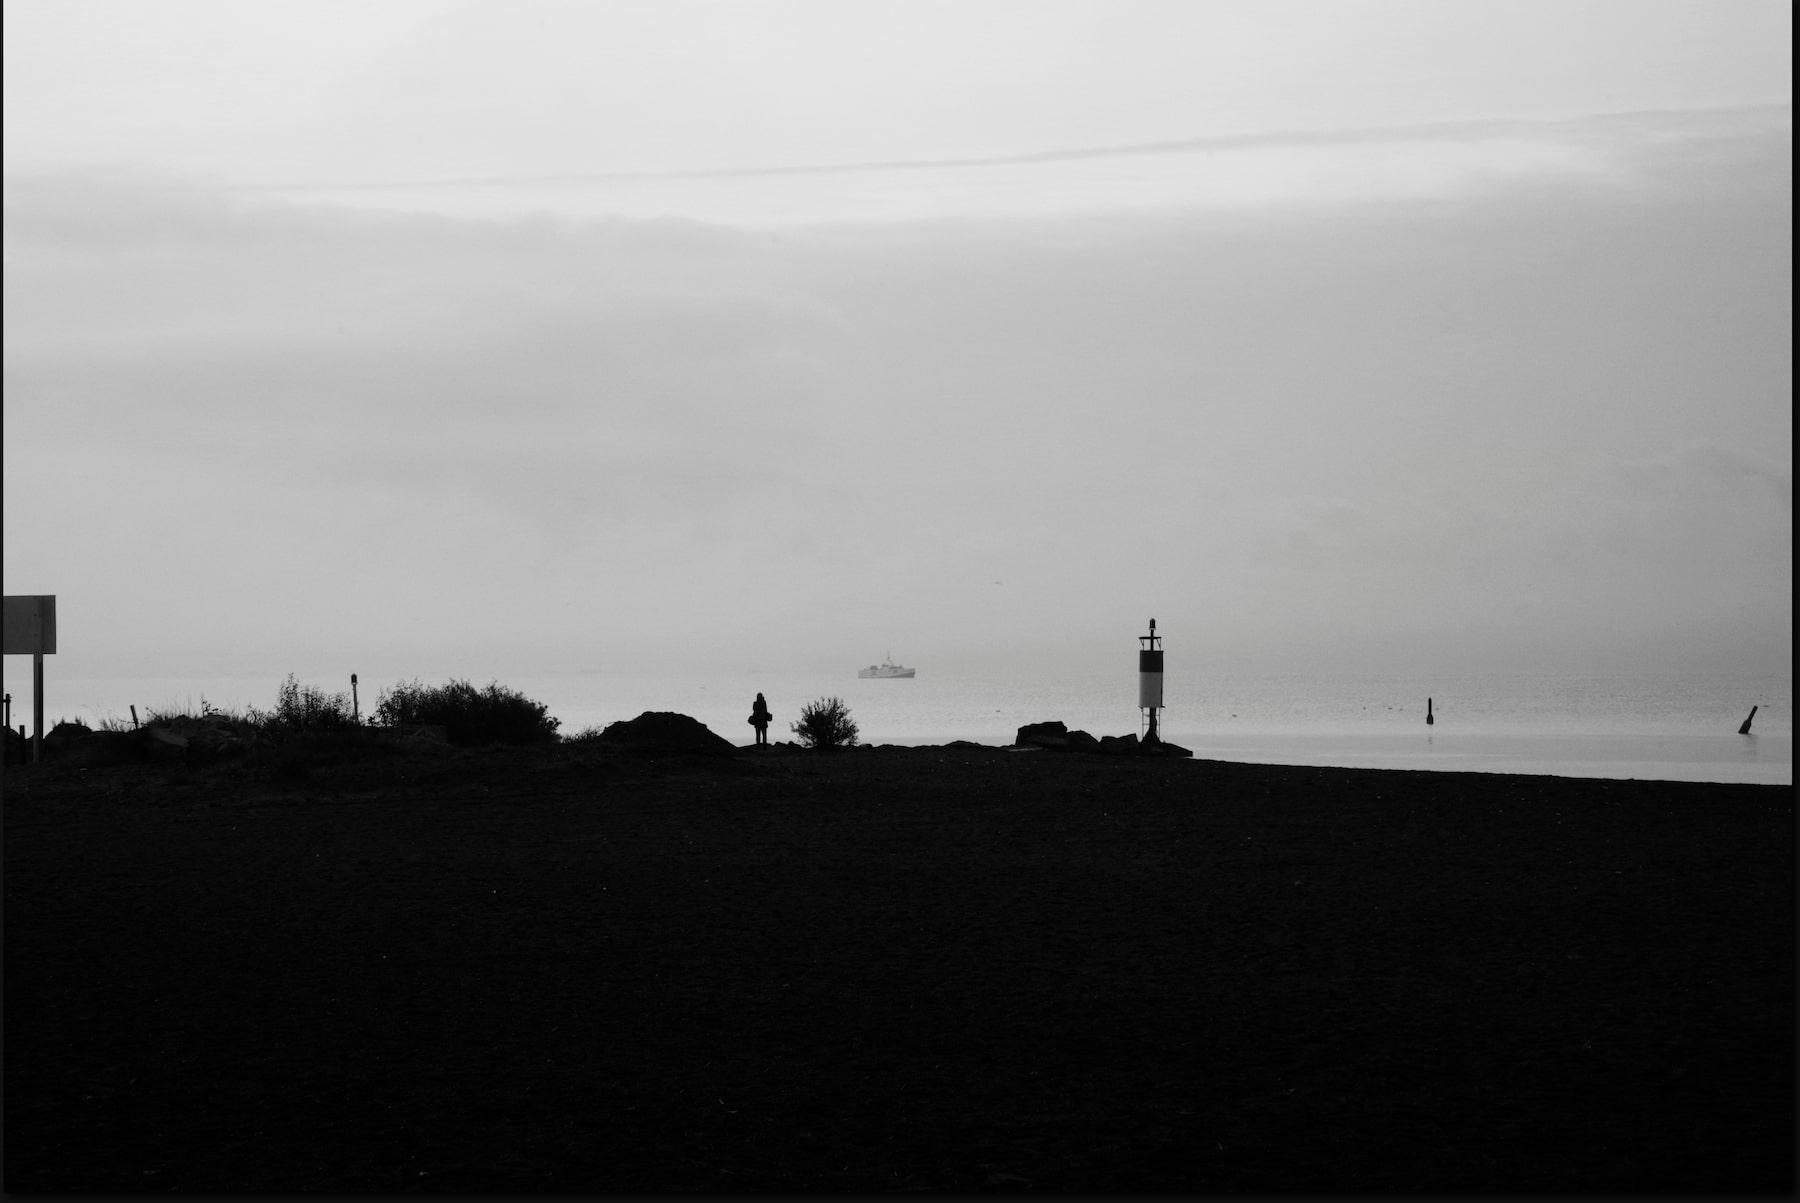 a silhouette of a photographer on a beach with a fish tug in the background